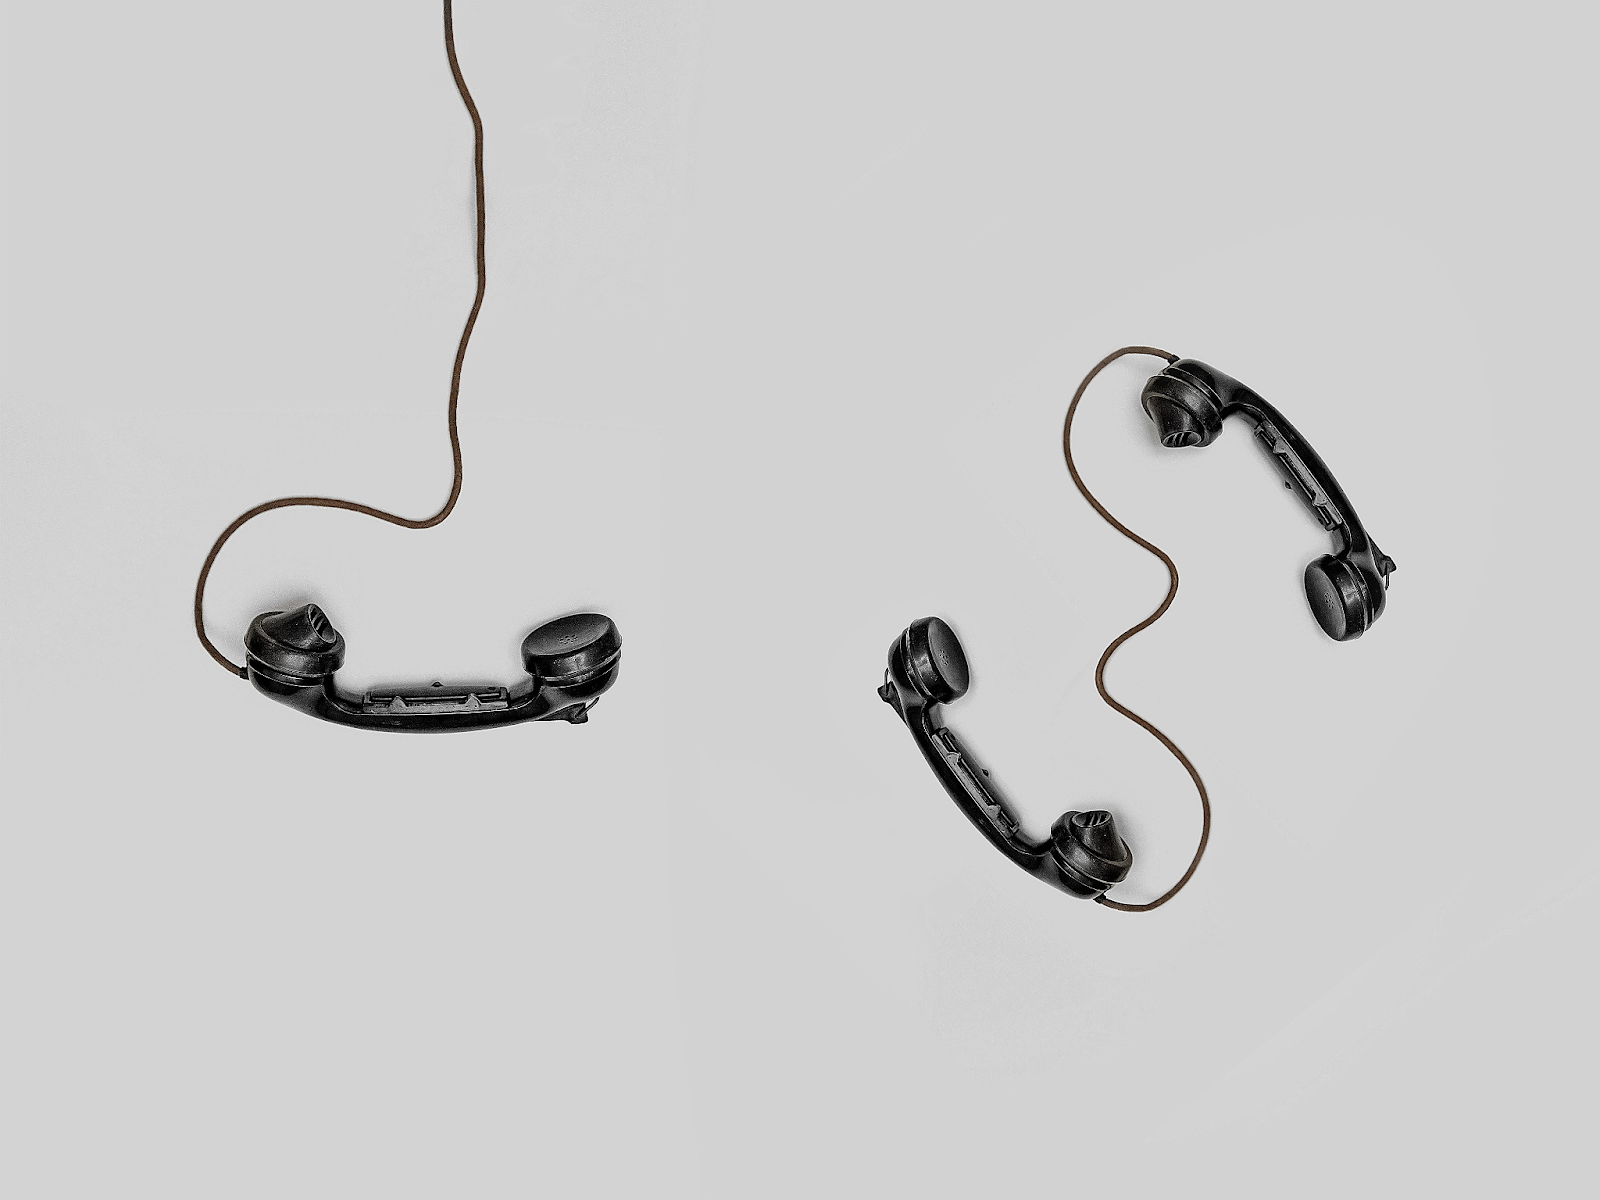 3 telephone headsets on a white background